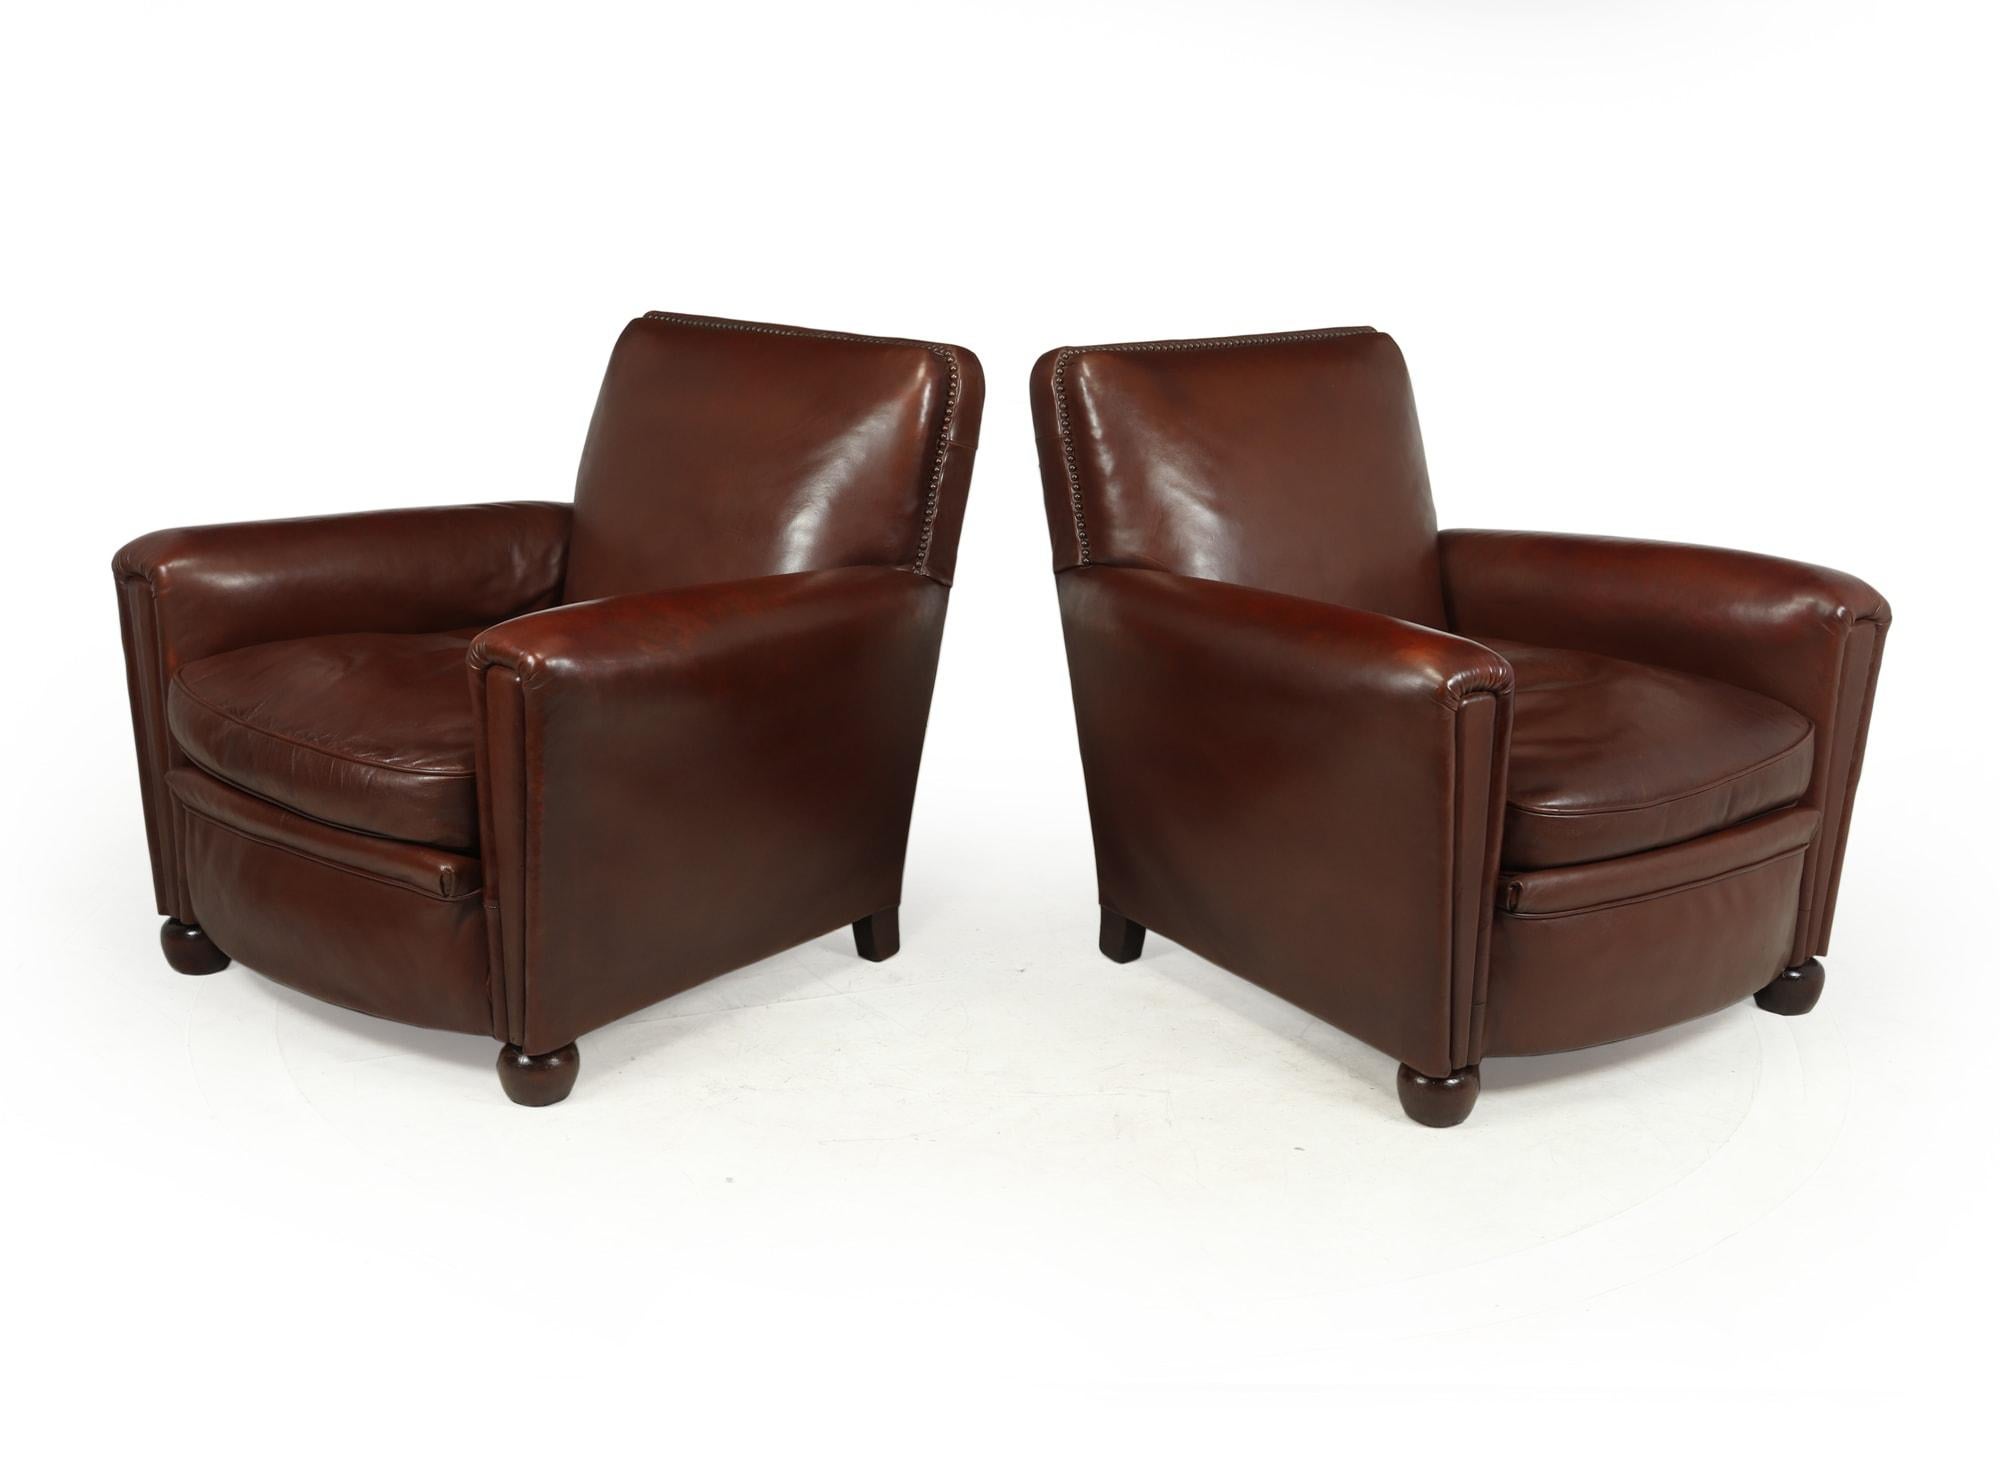 Other Pair of French Leather Club Chairs, c1940